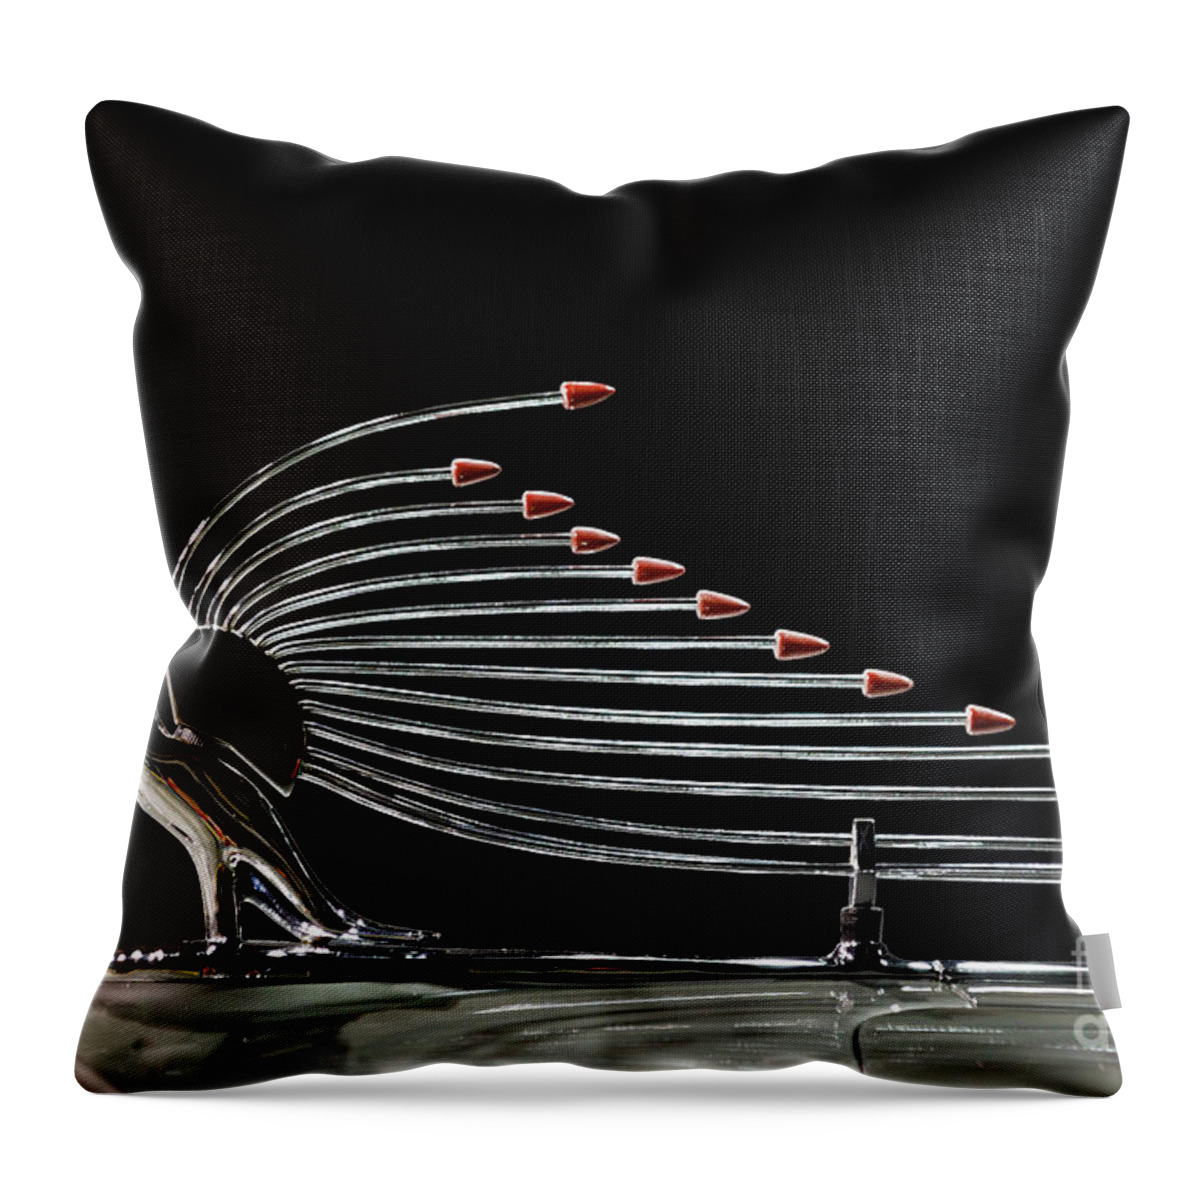 Packard Throw Pillow featuring the photograph Cormorant Antenna by Dennis Hedberg